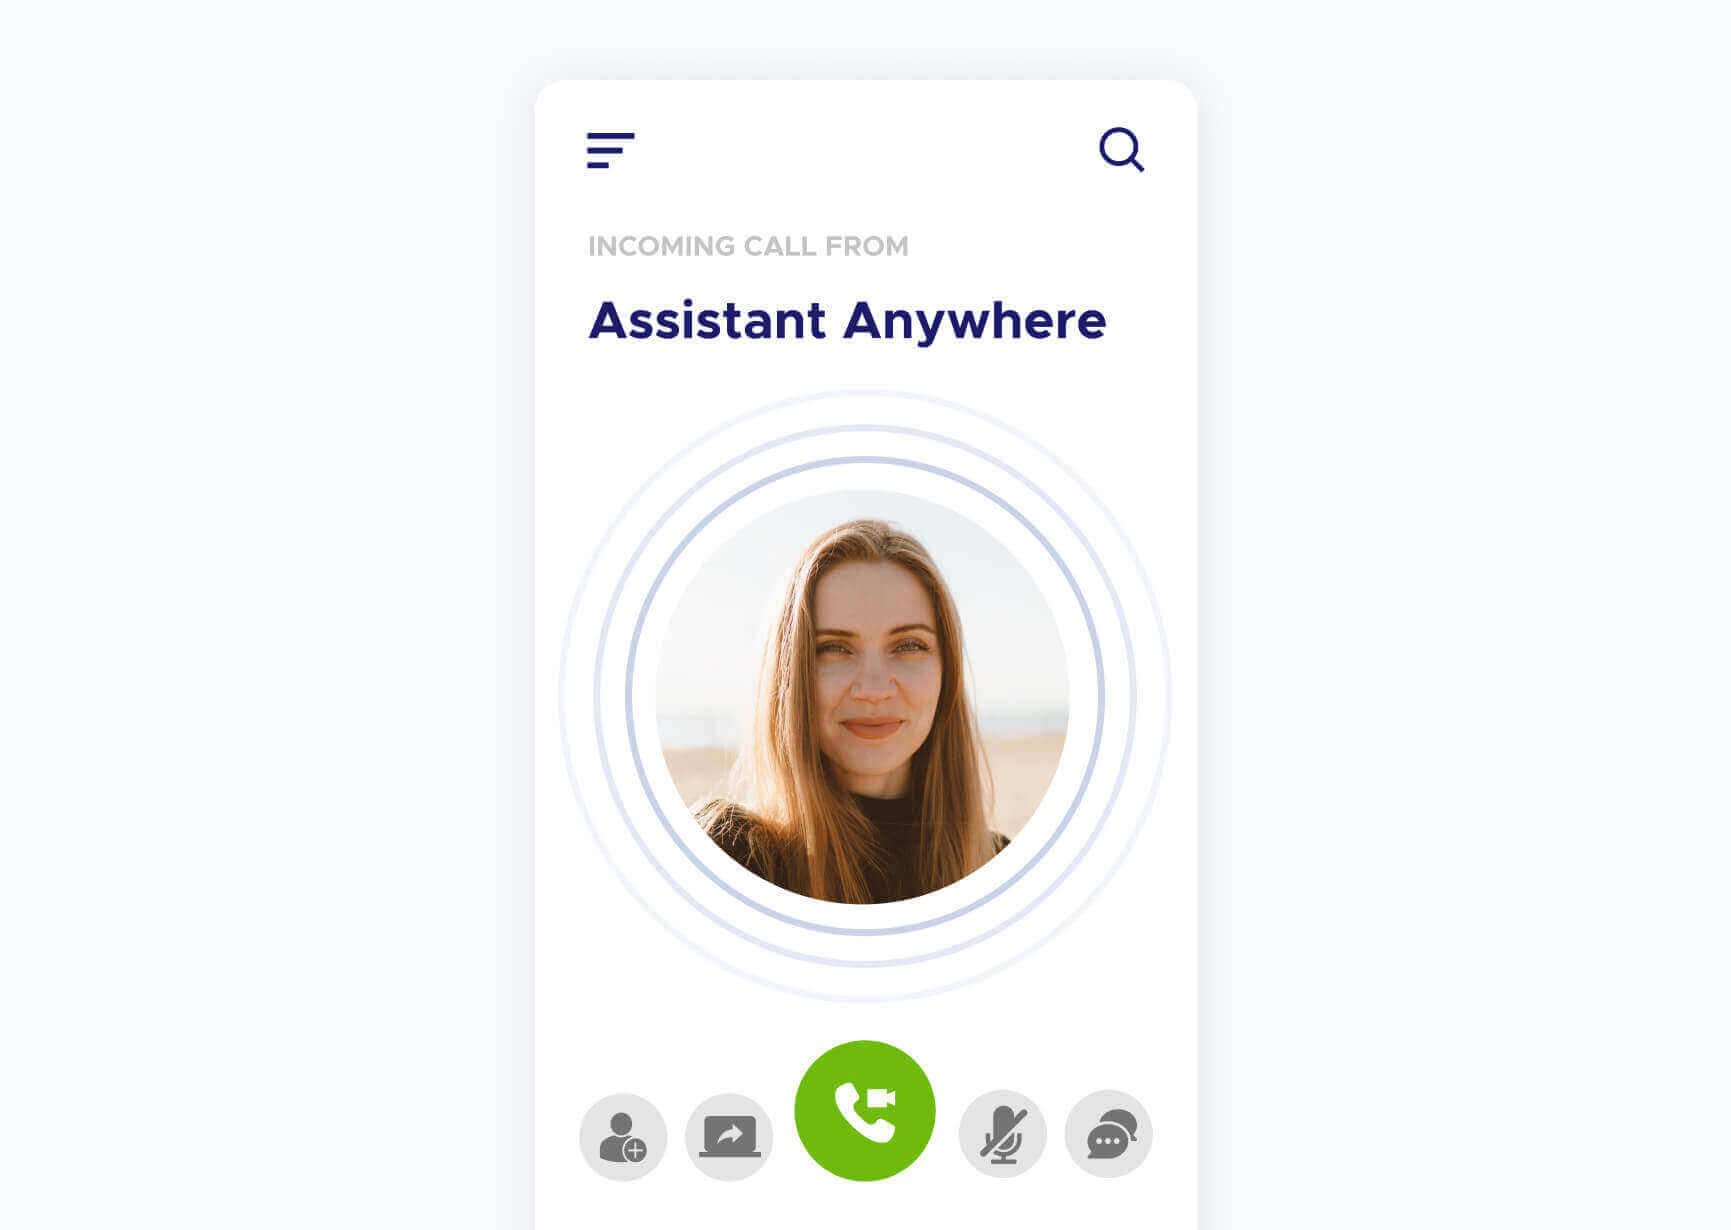 Simulation of a video call from the Assistant Anywhere application ENGB